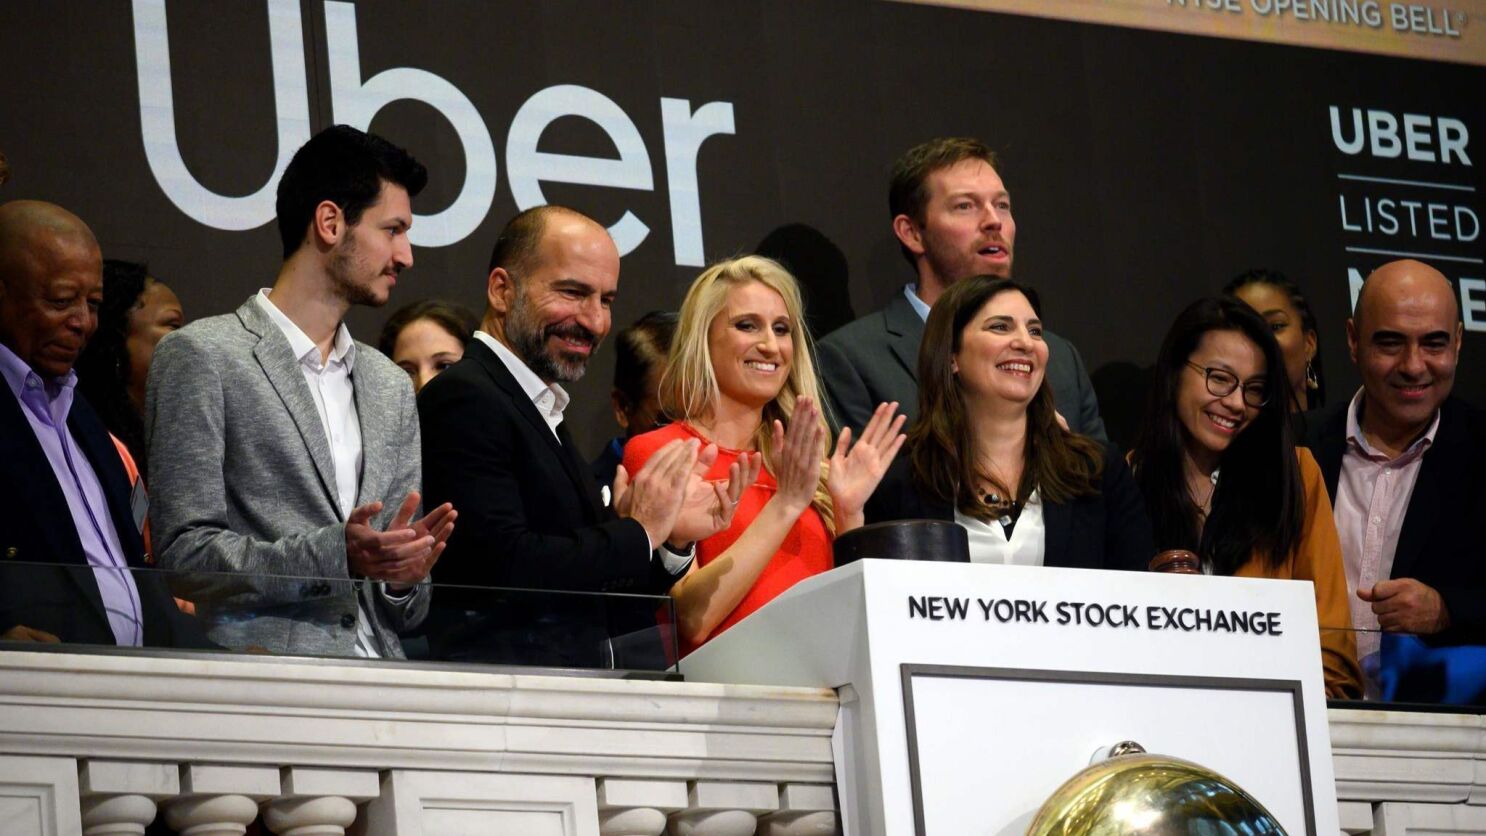 Uber IPO: Stock sinks more than 7% on first day of public trading - Los Angeles Times